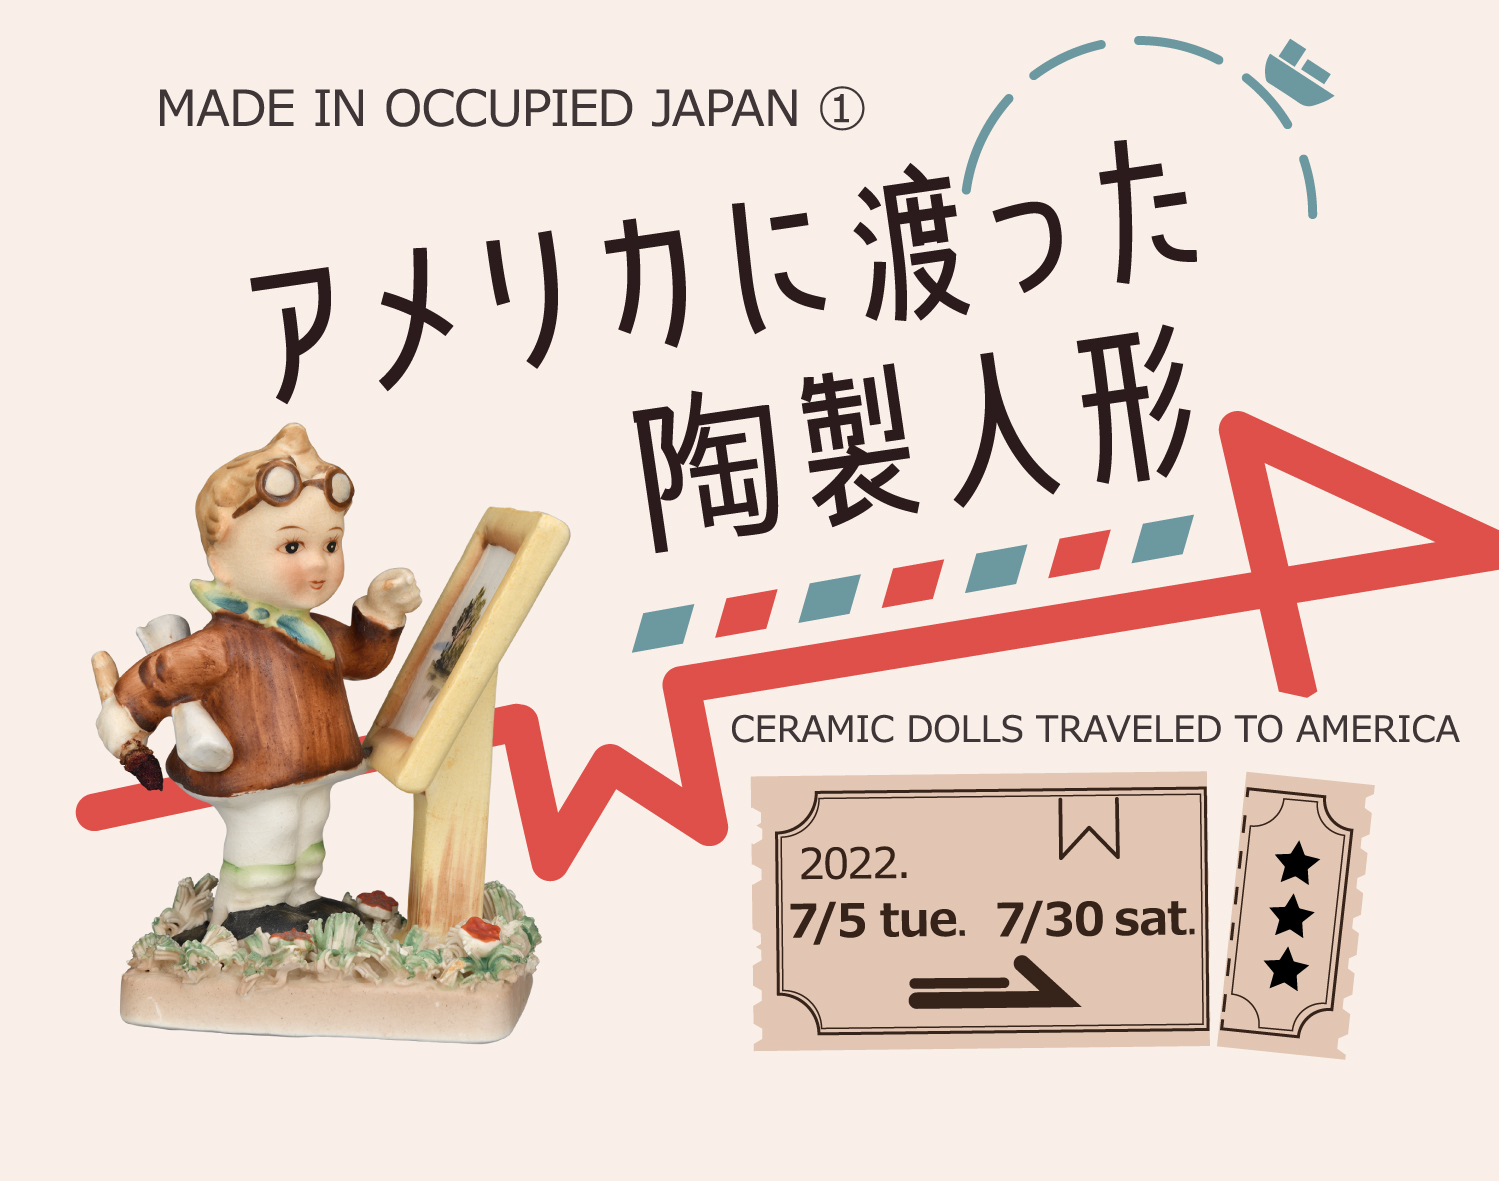 MADE IN OCCUPIED JAPAN
CERAMIC DOLLS TRAVELED TO AMERICA